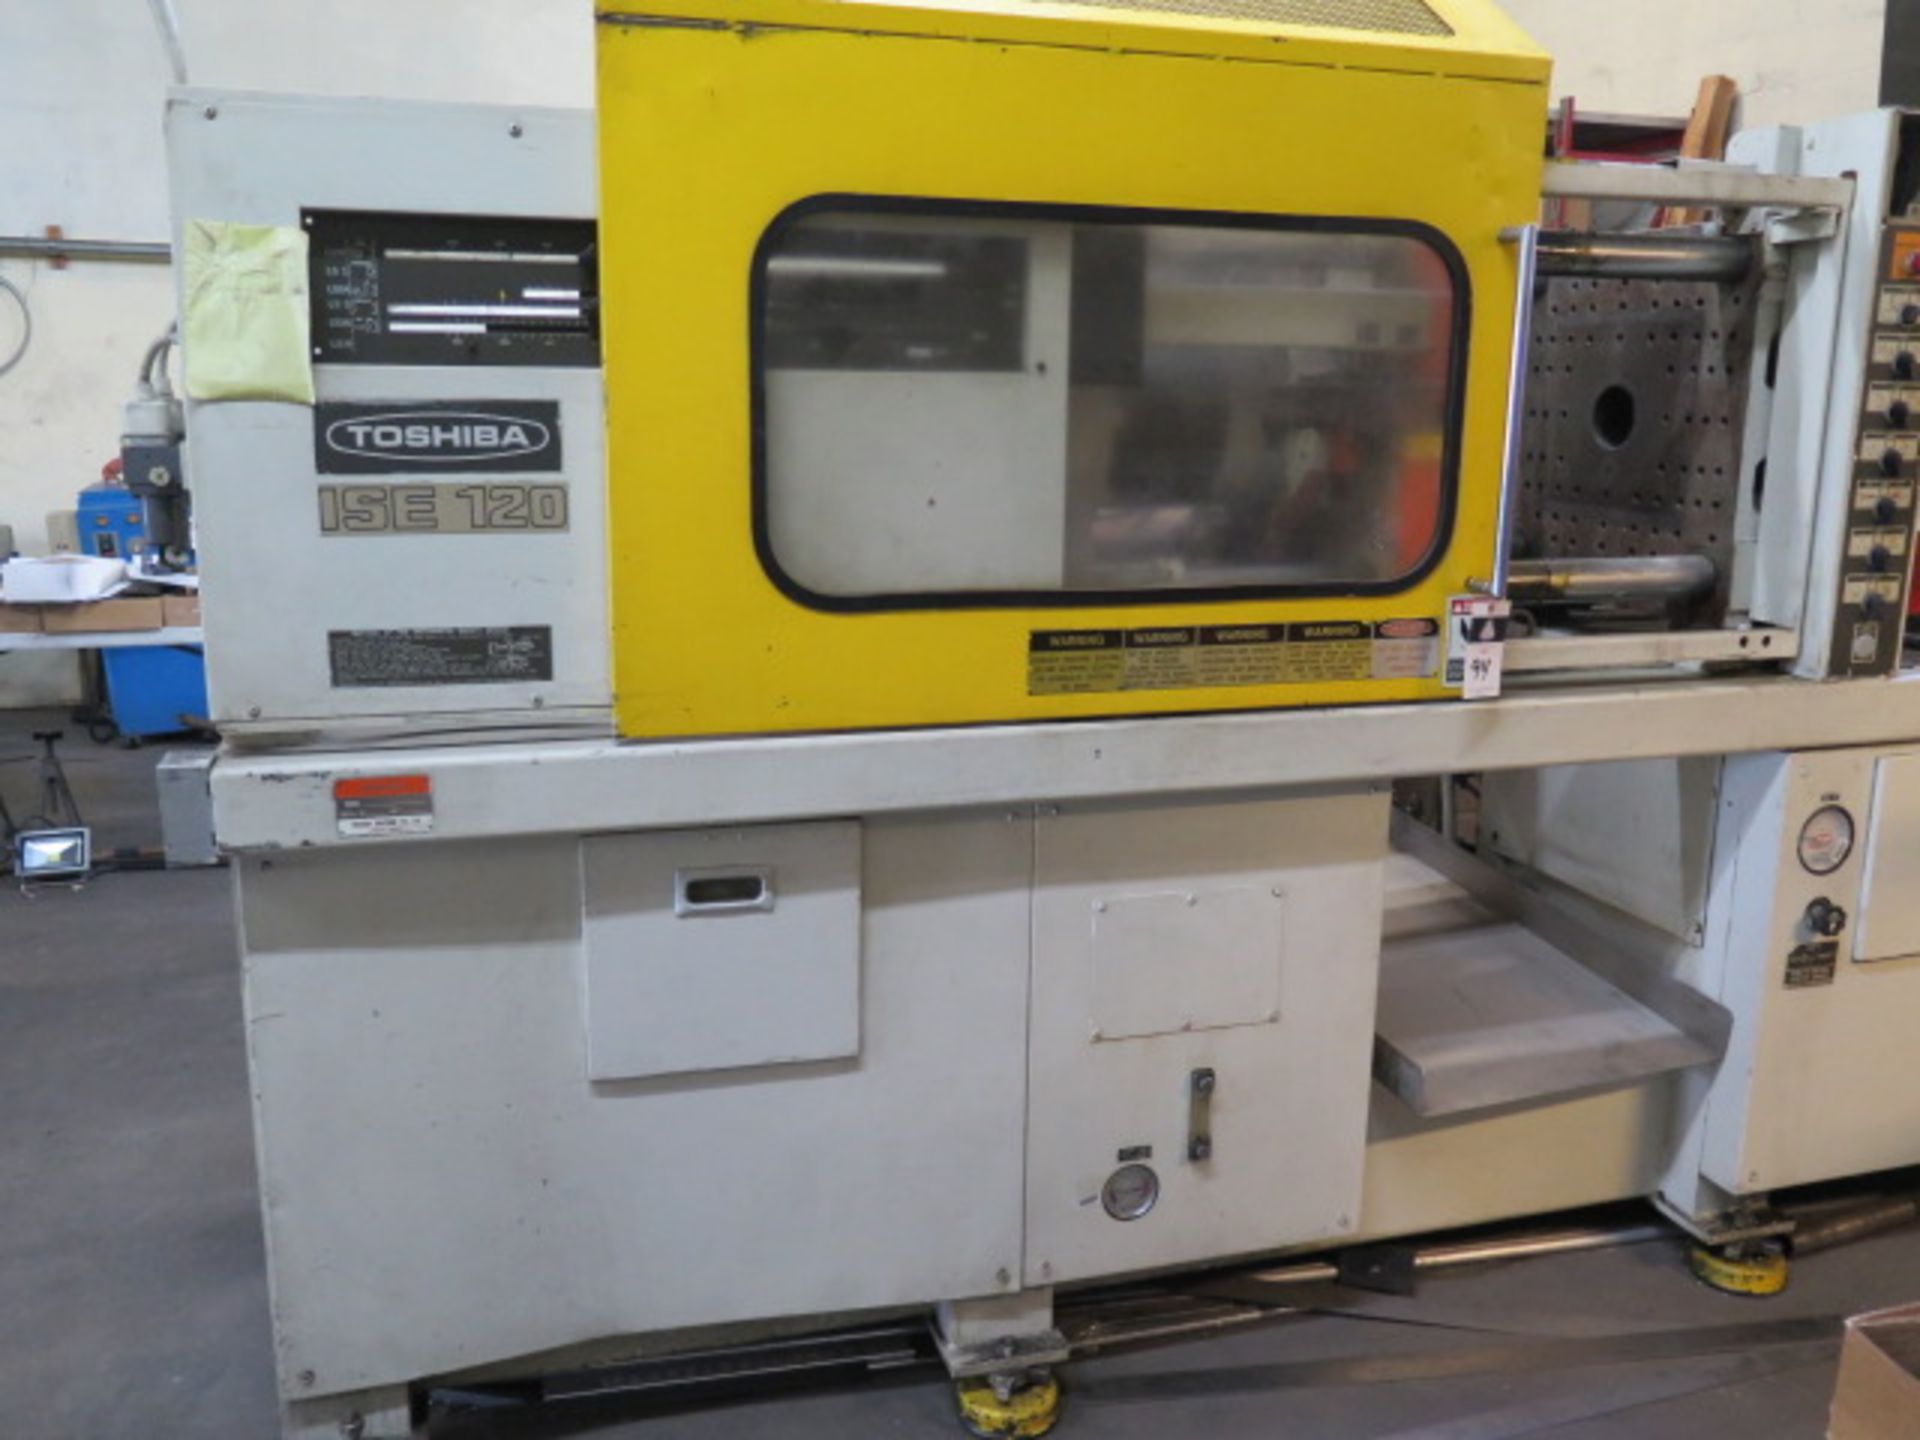 Toshiba ISE-120-SA 120 Ton Plastic Injection Molding Machine s/n 435503, SOLD AS IS - Image 2 of 14